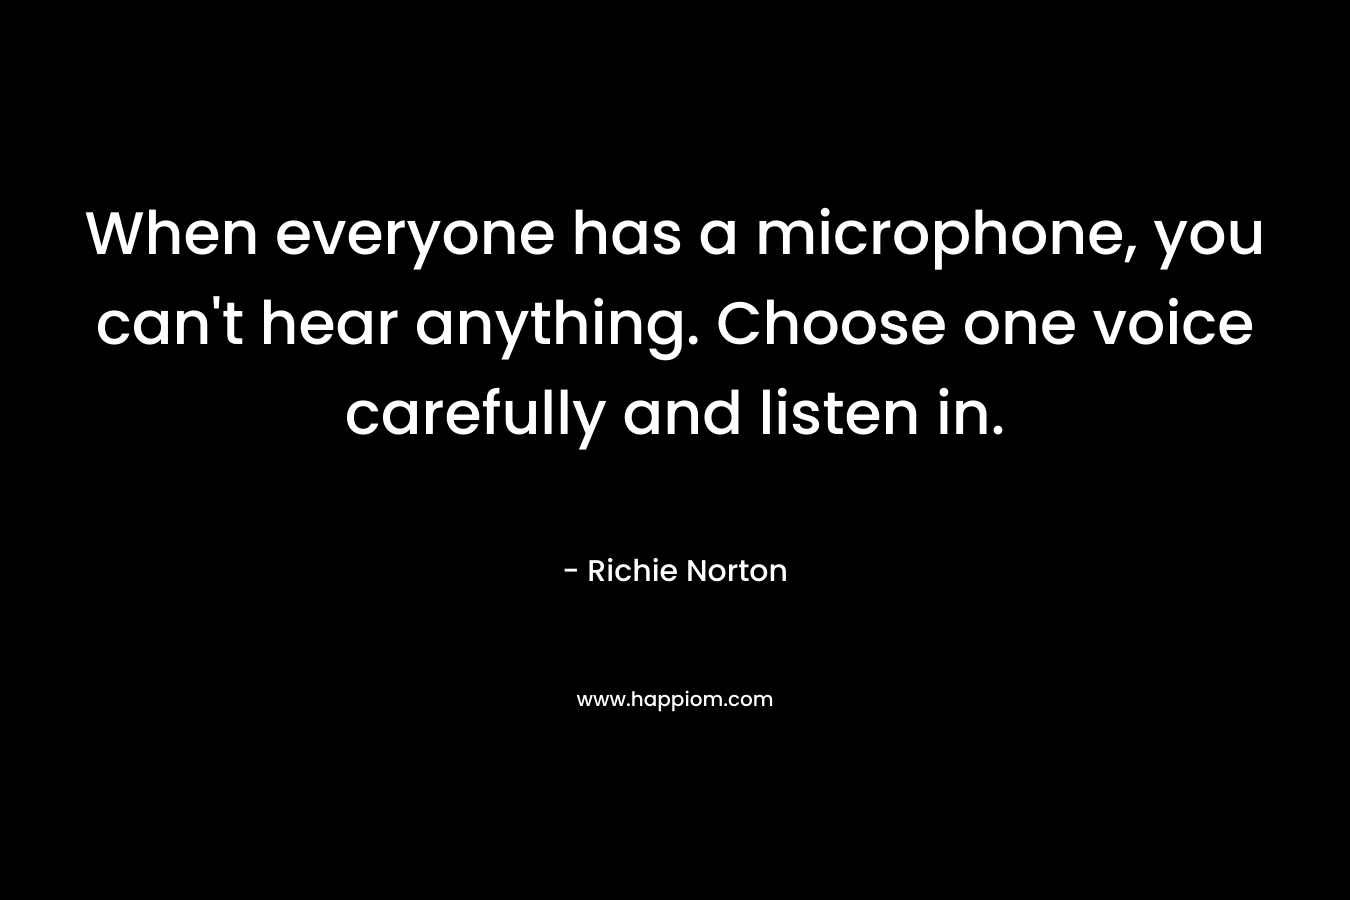 When everyone has a microphone, you can't hear anything. Choose one voice carefully and listen in.